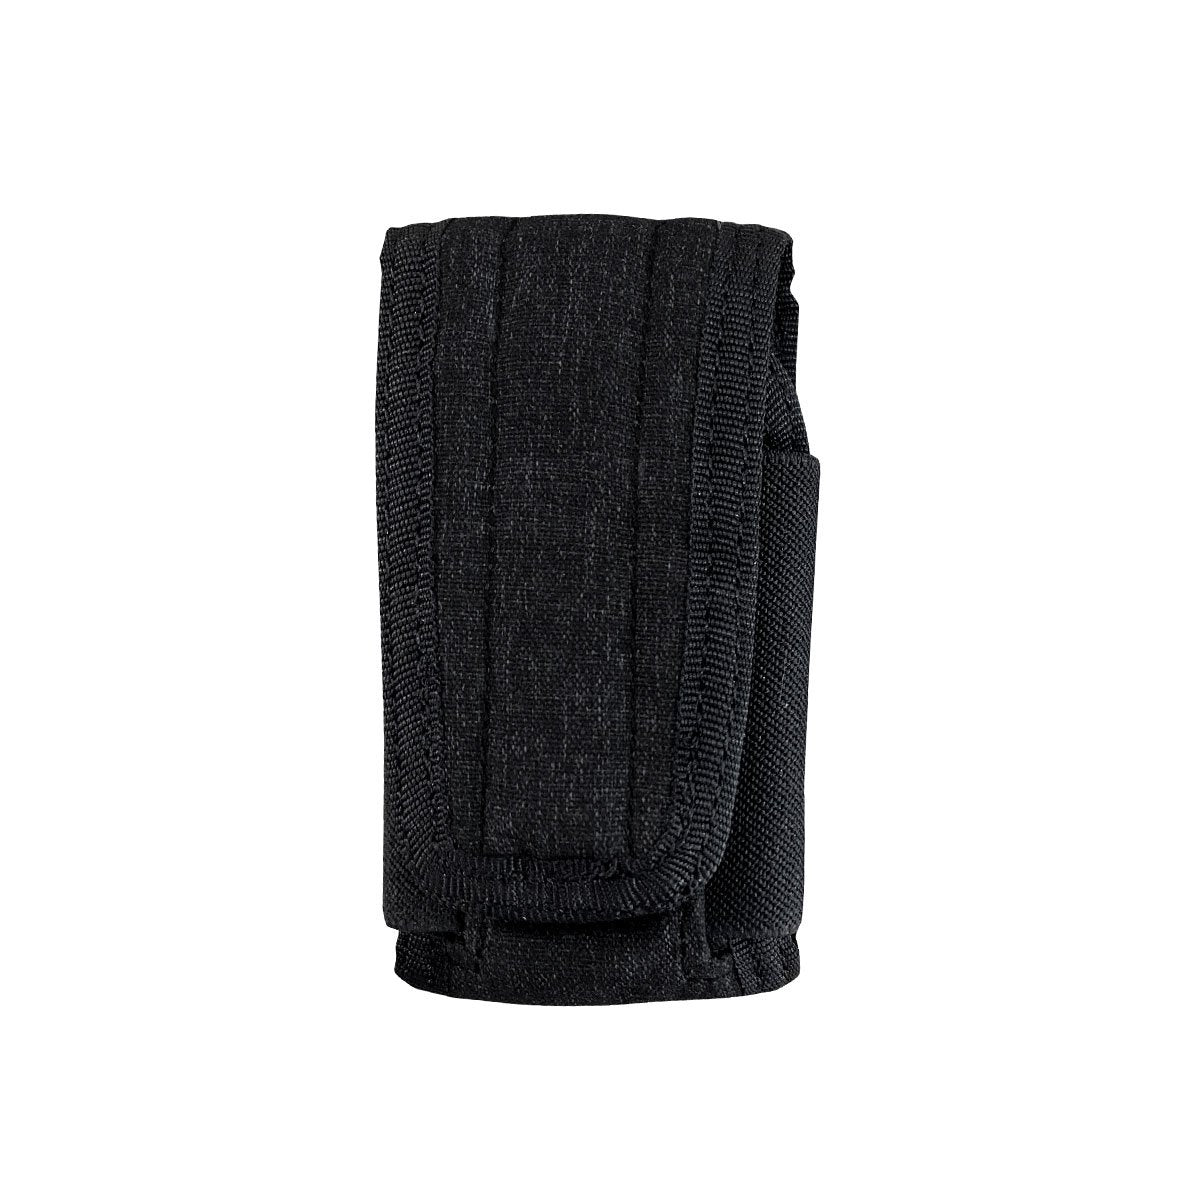 Maxpedition Entity Utility Pouch Small | Tactical Gear Australia Tactical Gear